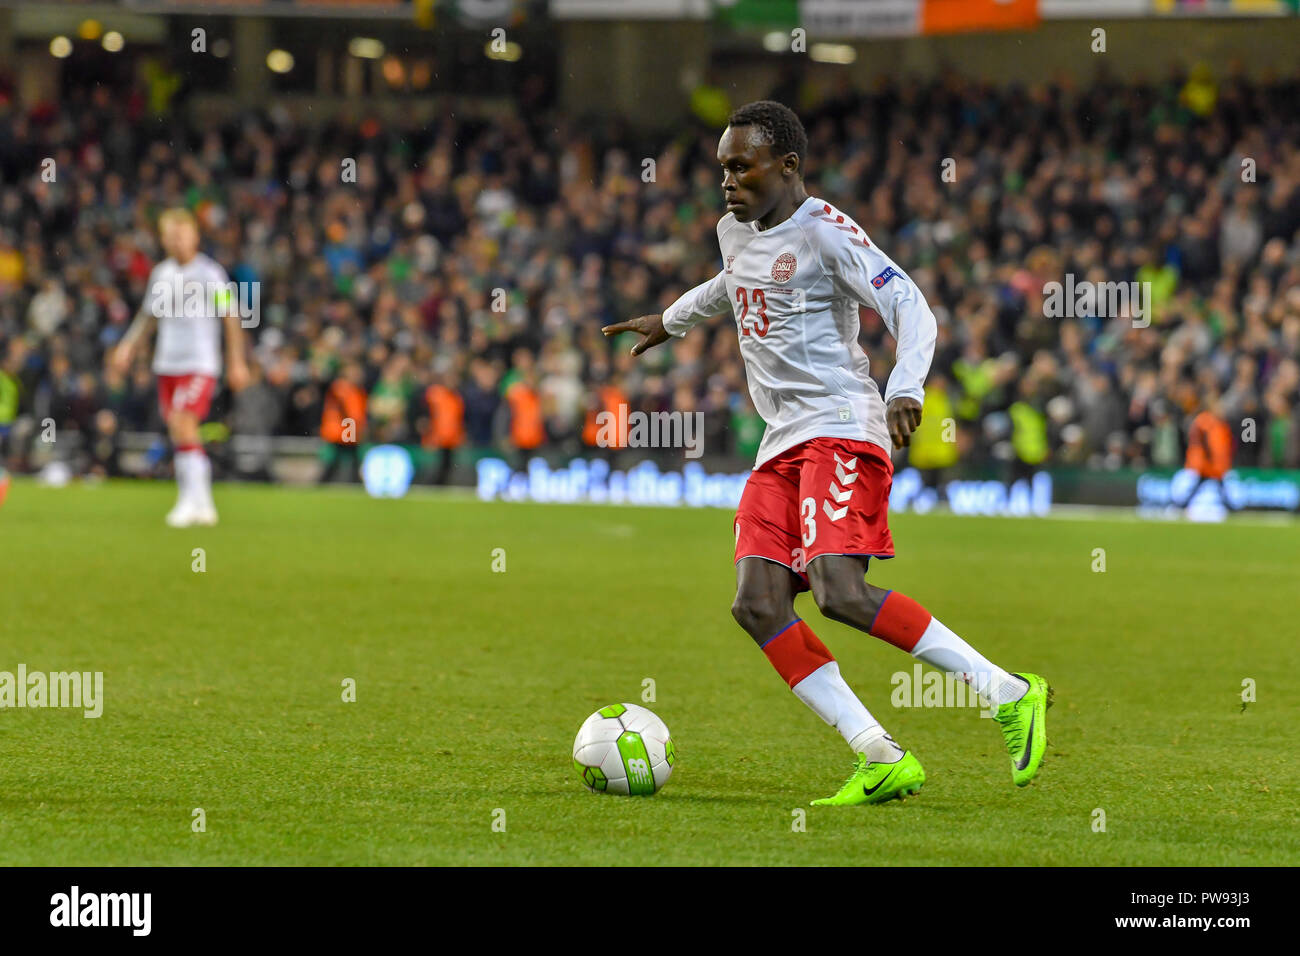 Pione Sisto in action during the Rep of Ireland vs Denmark UEFA Nations League match at the Aviva Stadium. Score 0-0 Stock Photo